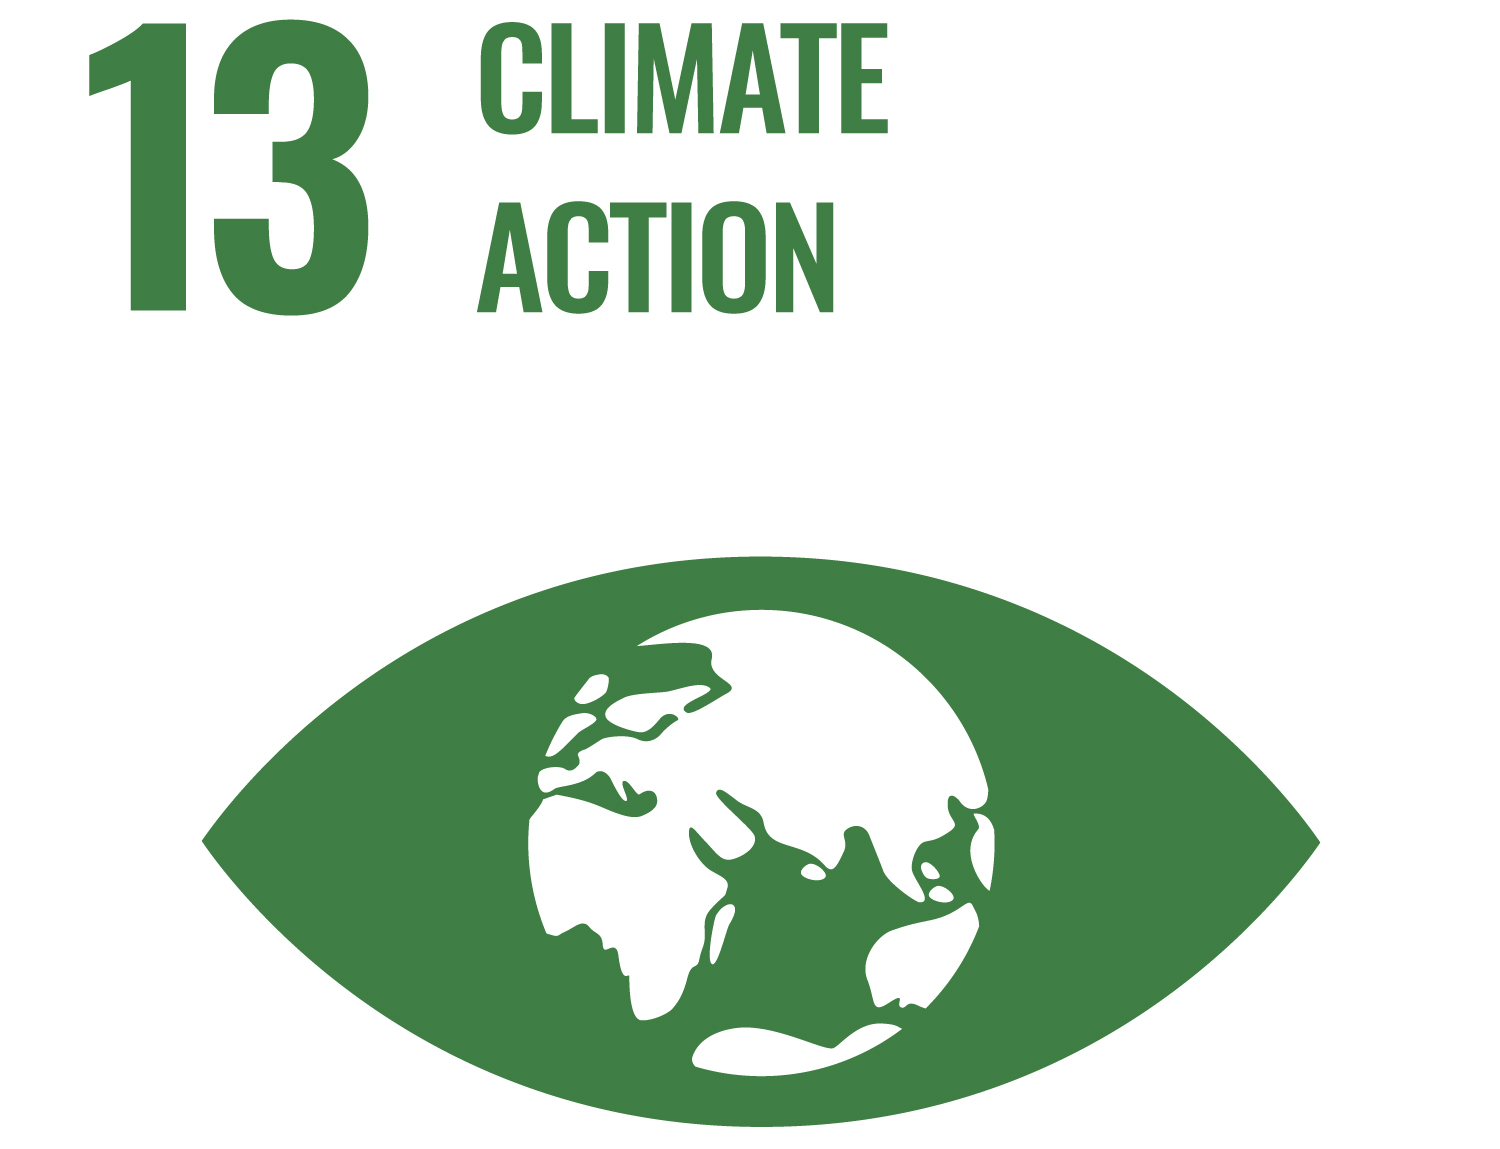 Goal 13: Climate Action